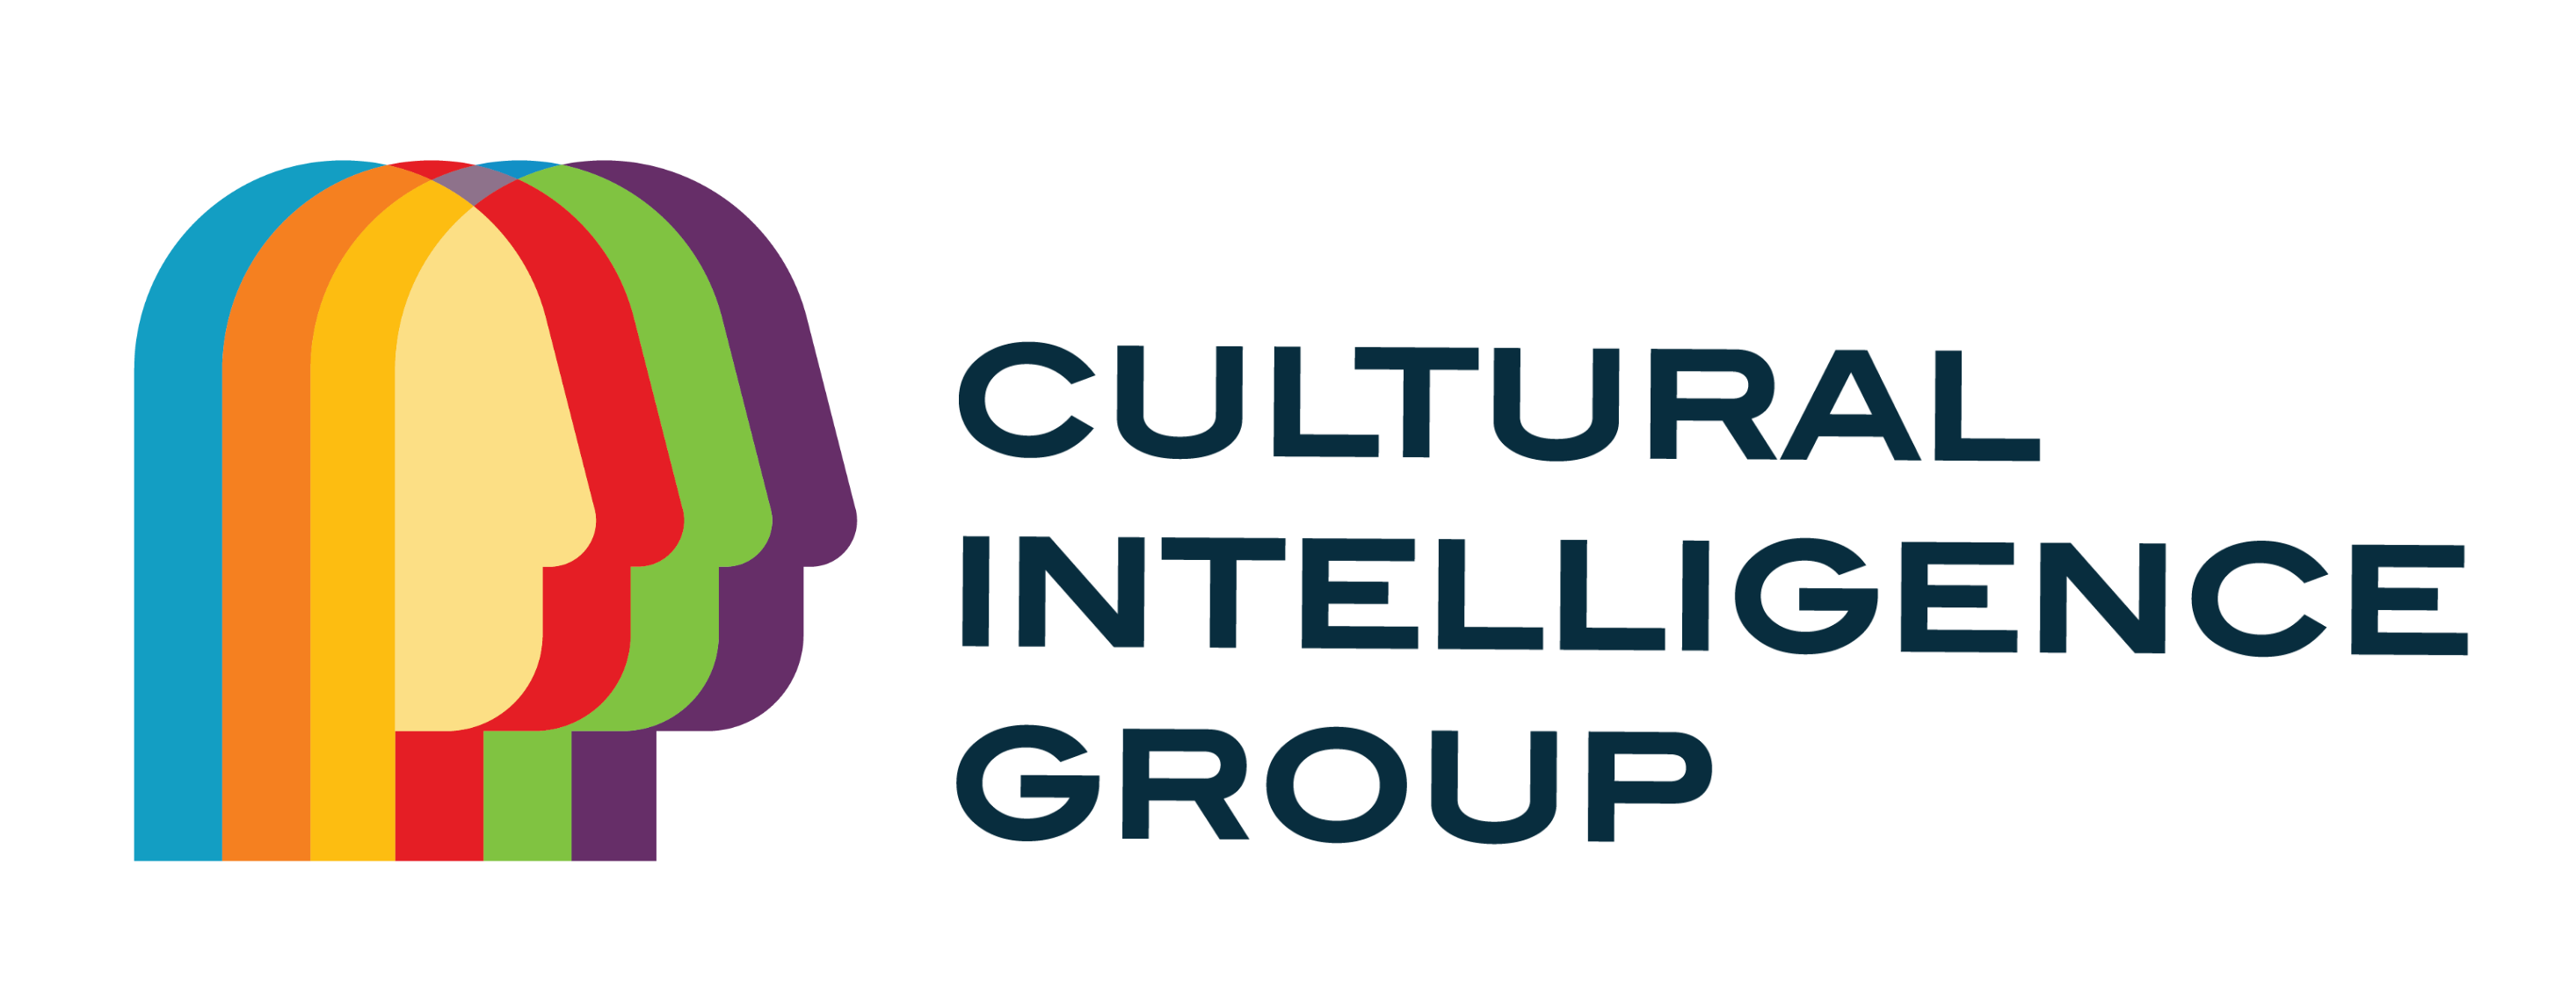 Cultural Intelligence Group logo; Multicolor layered silhouette of a human face to the left of Cultural Intelligence Group